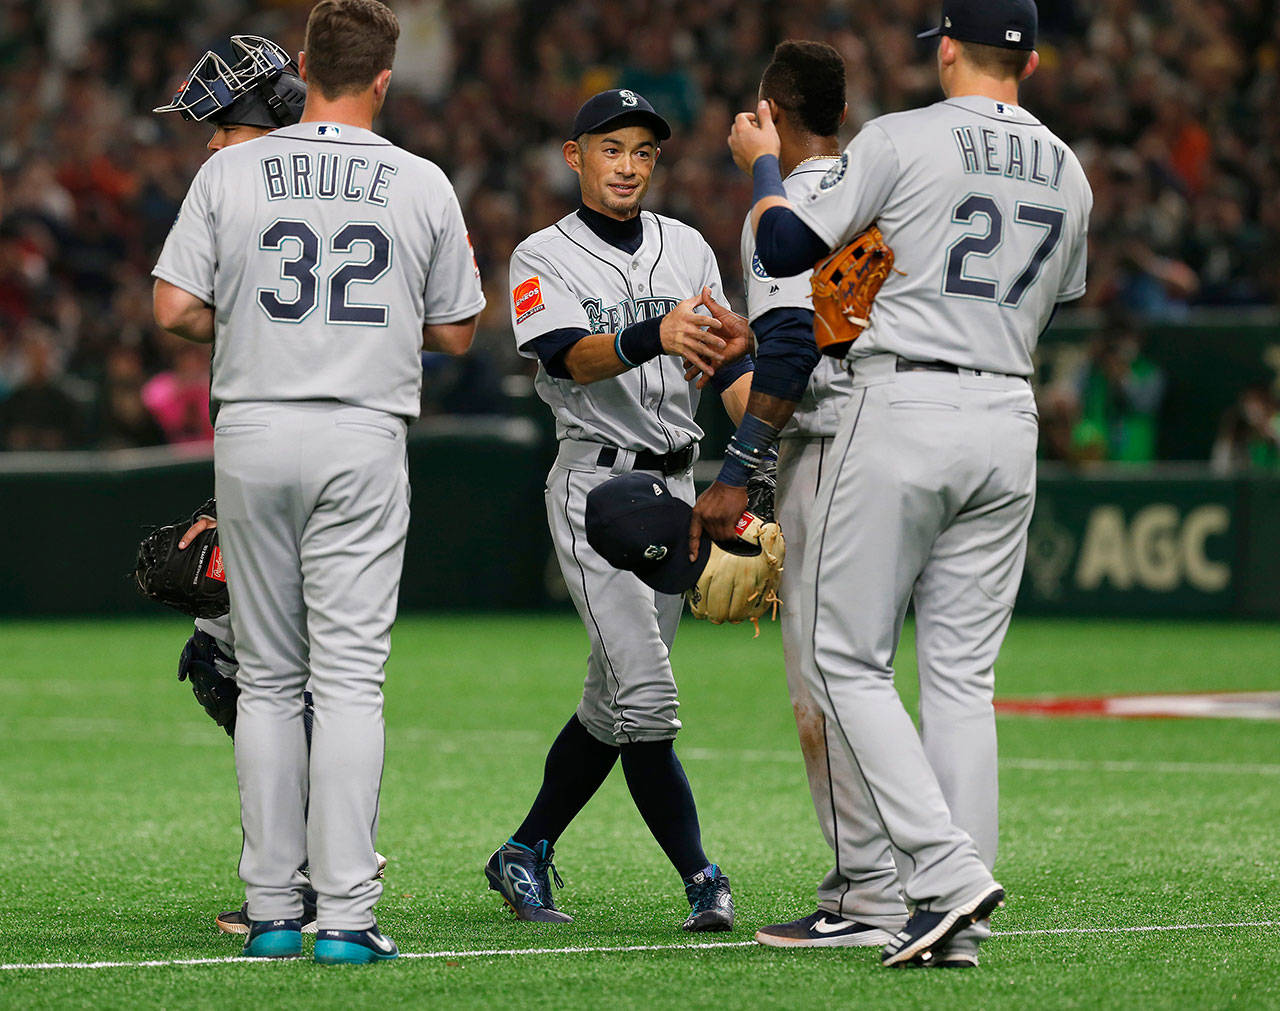 Seattles Ichiro Suzuki (center) greets teammates while leaving the field after being subsituted in the fourth inning of the Mariners 9-7 win over Oakland on Wednesday in Tokyo. (AP Photo/Toru Takahashi)